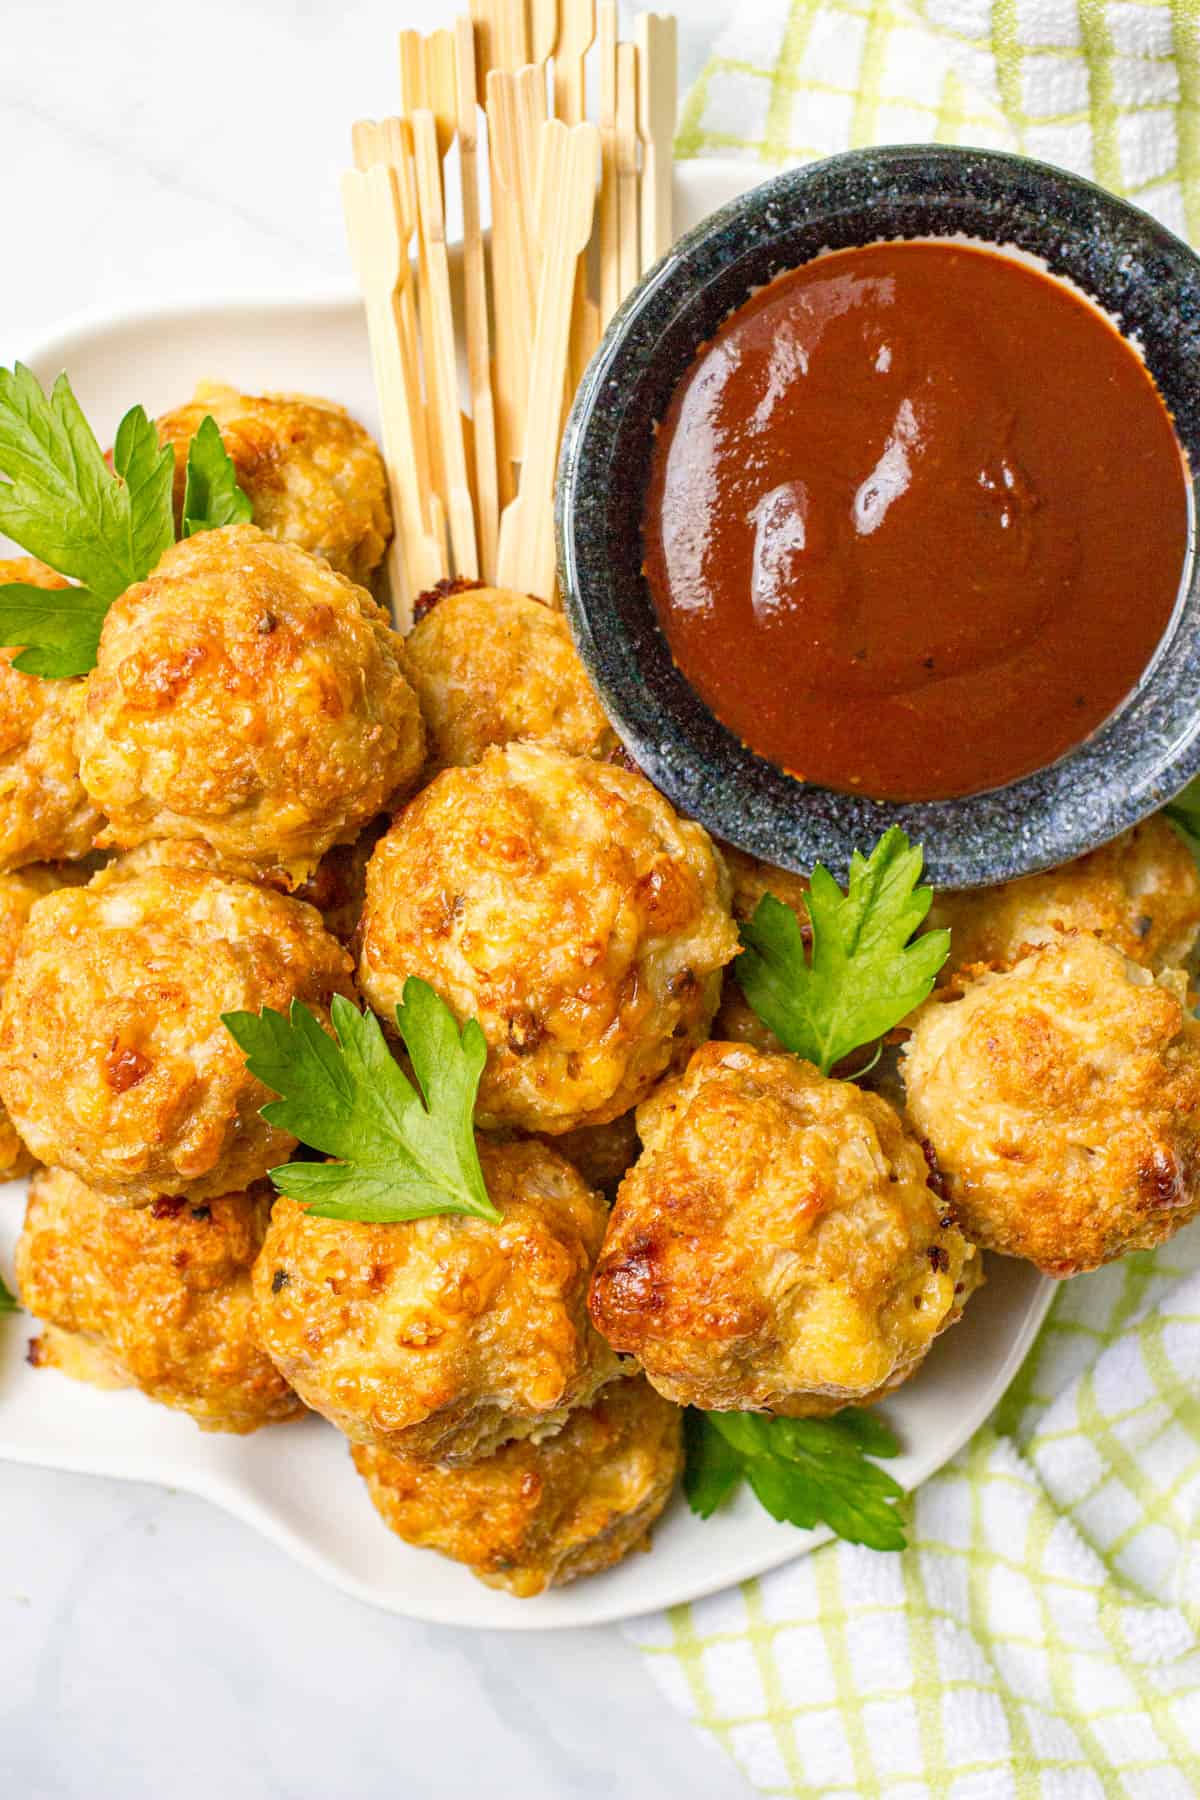 Cheesy chicken meatballs on a white plate with a bowl of BBQ sauce for dipping and leaves of parsley sprinkled over top.